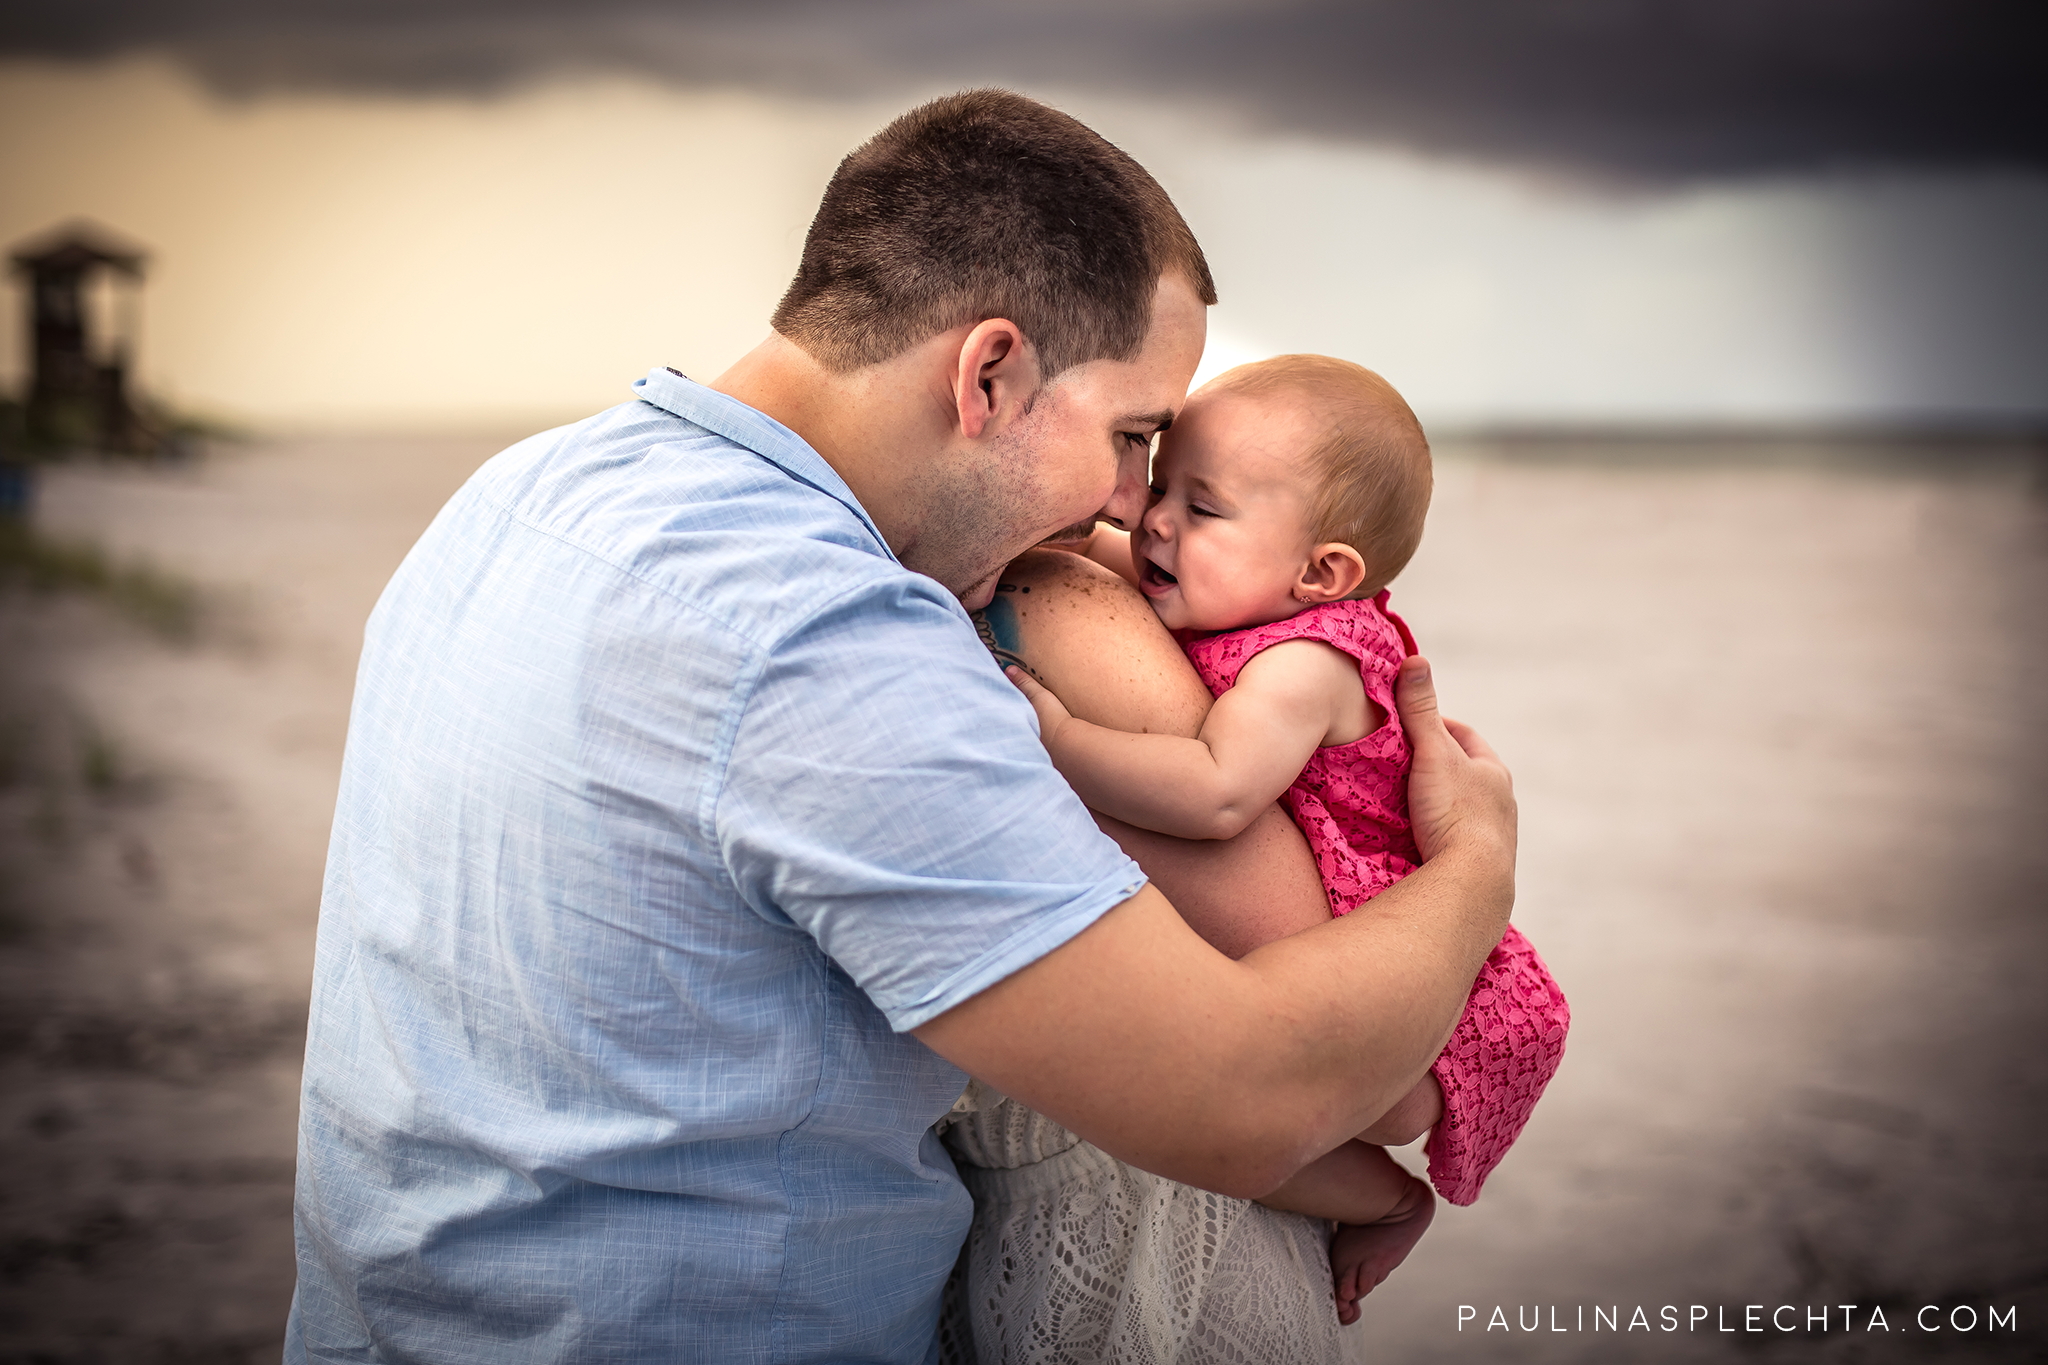 family-photographer-photo-shoot-boca-raton-delray-beach-west-palm-ft-lauderdale-south-florida-baby-photo.png